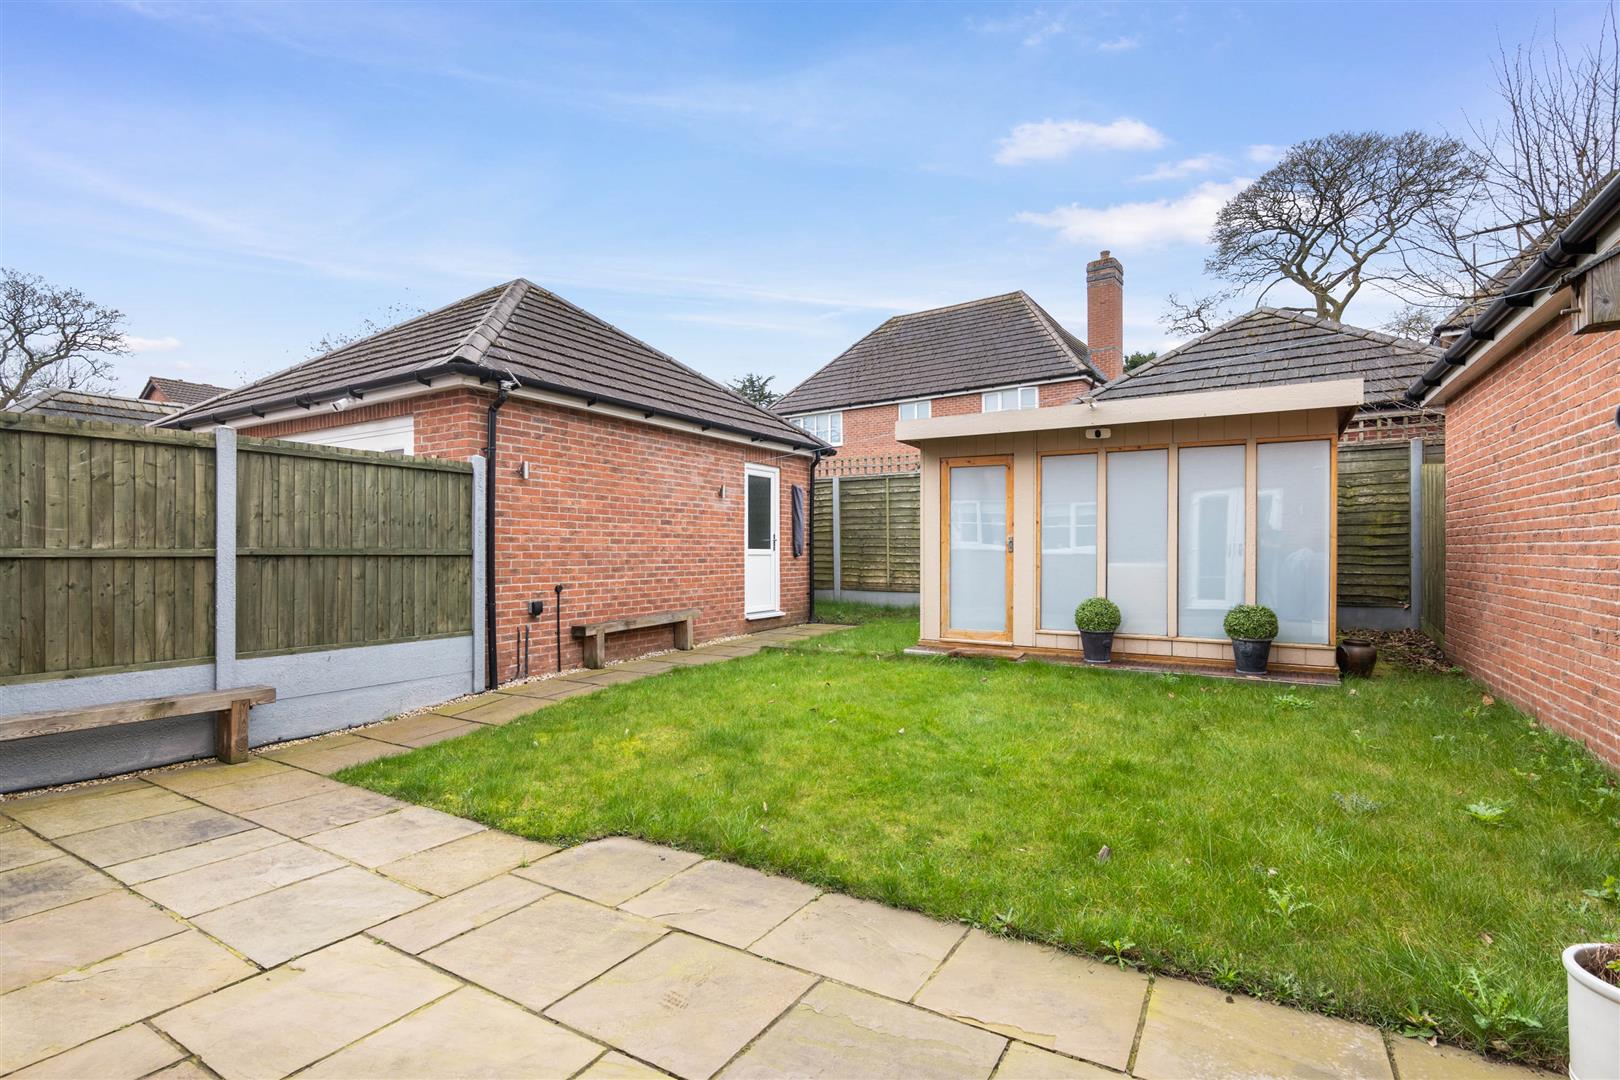 4 bed detached house for sale in Whittington Road, Stourbridge  - Property Image 16